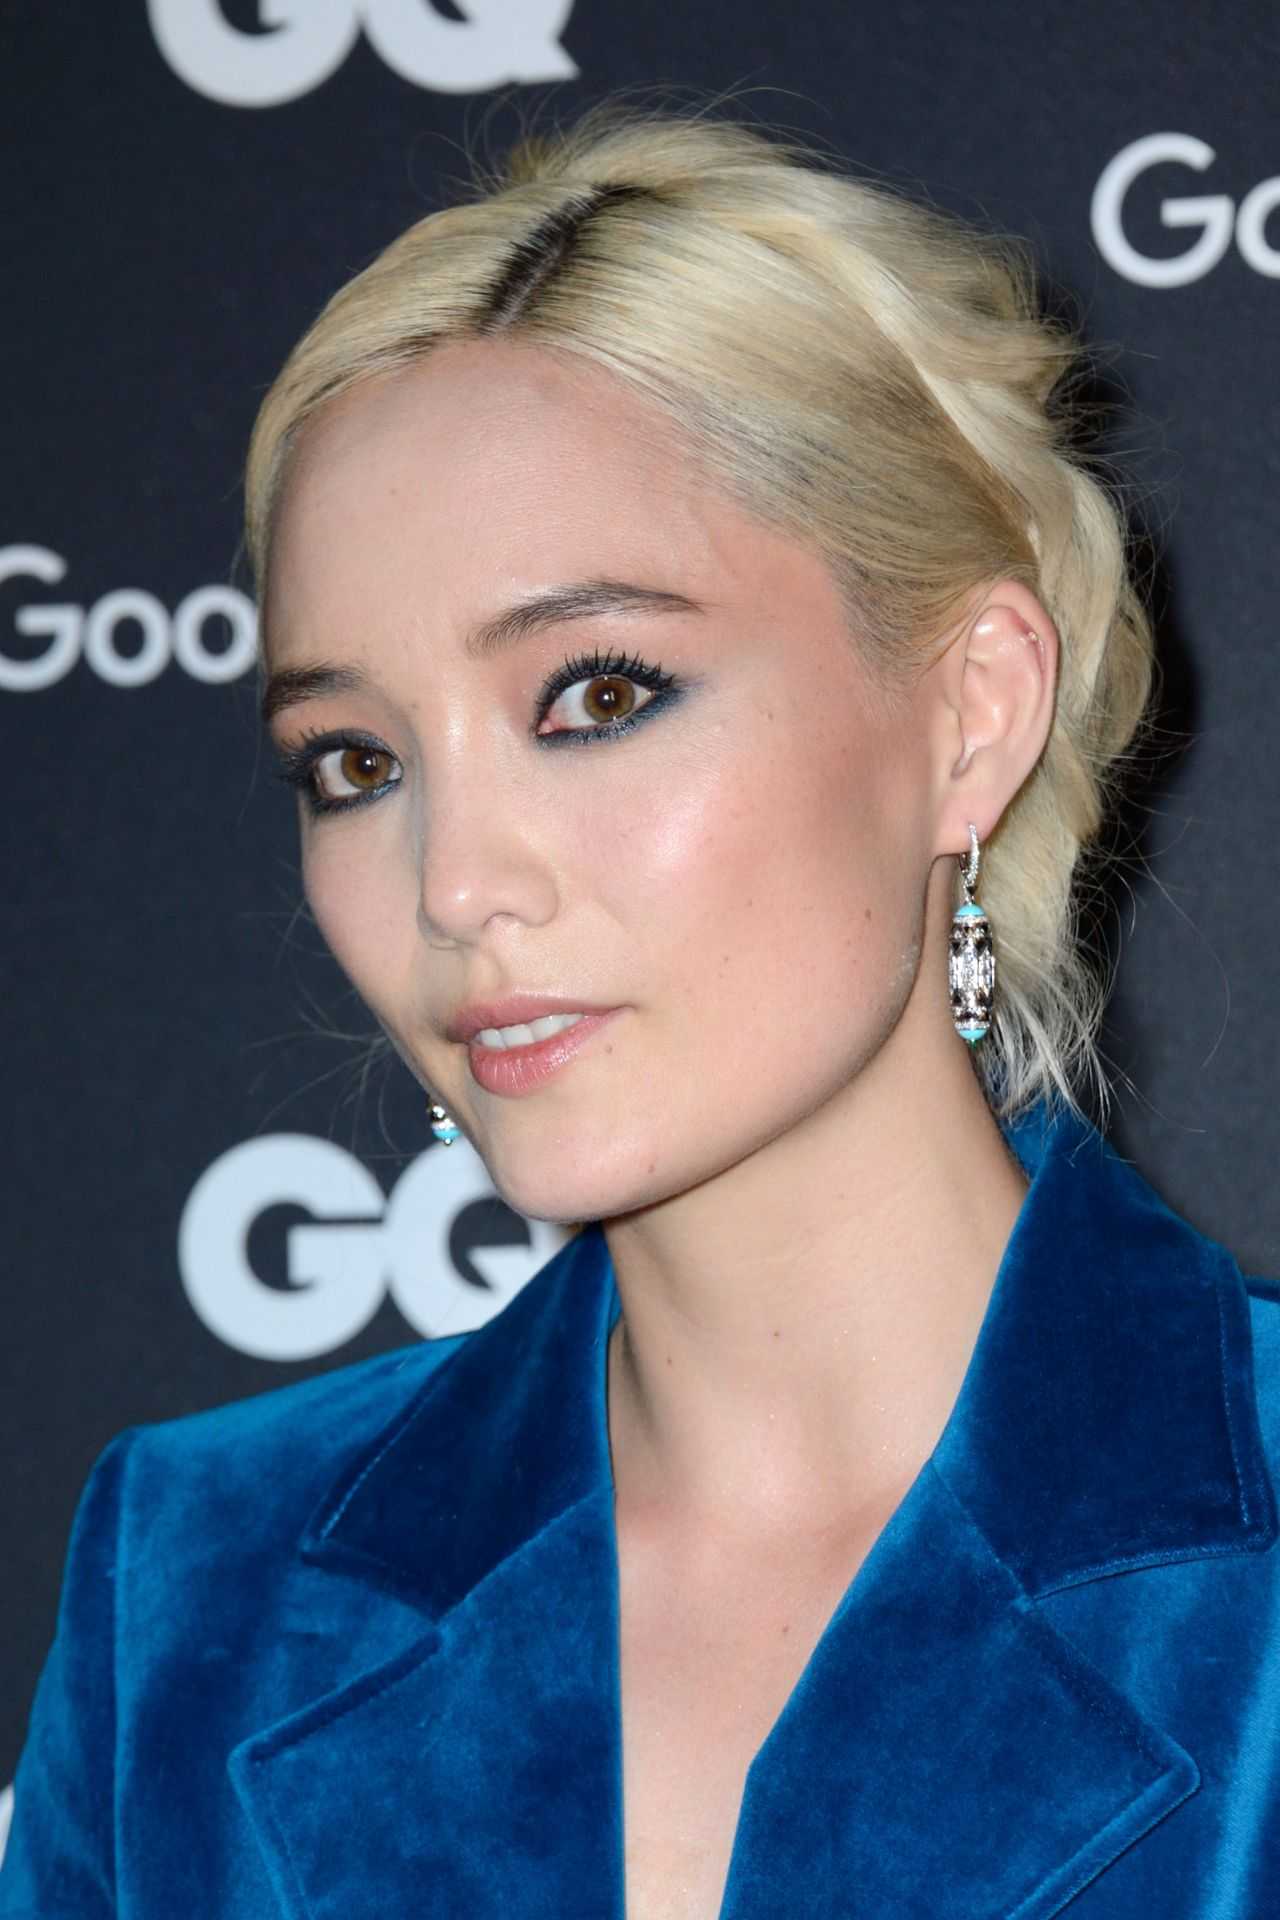 70+ Hot Pictures Of Pom Klementieff Who Plays Mantis In Marvel Cinematic Universe 110